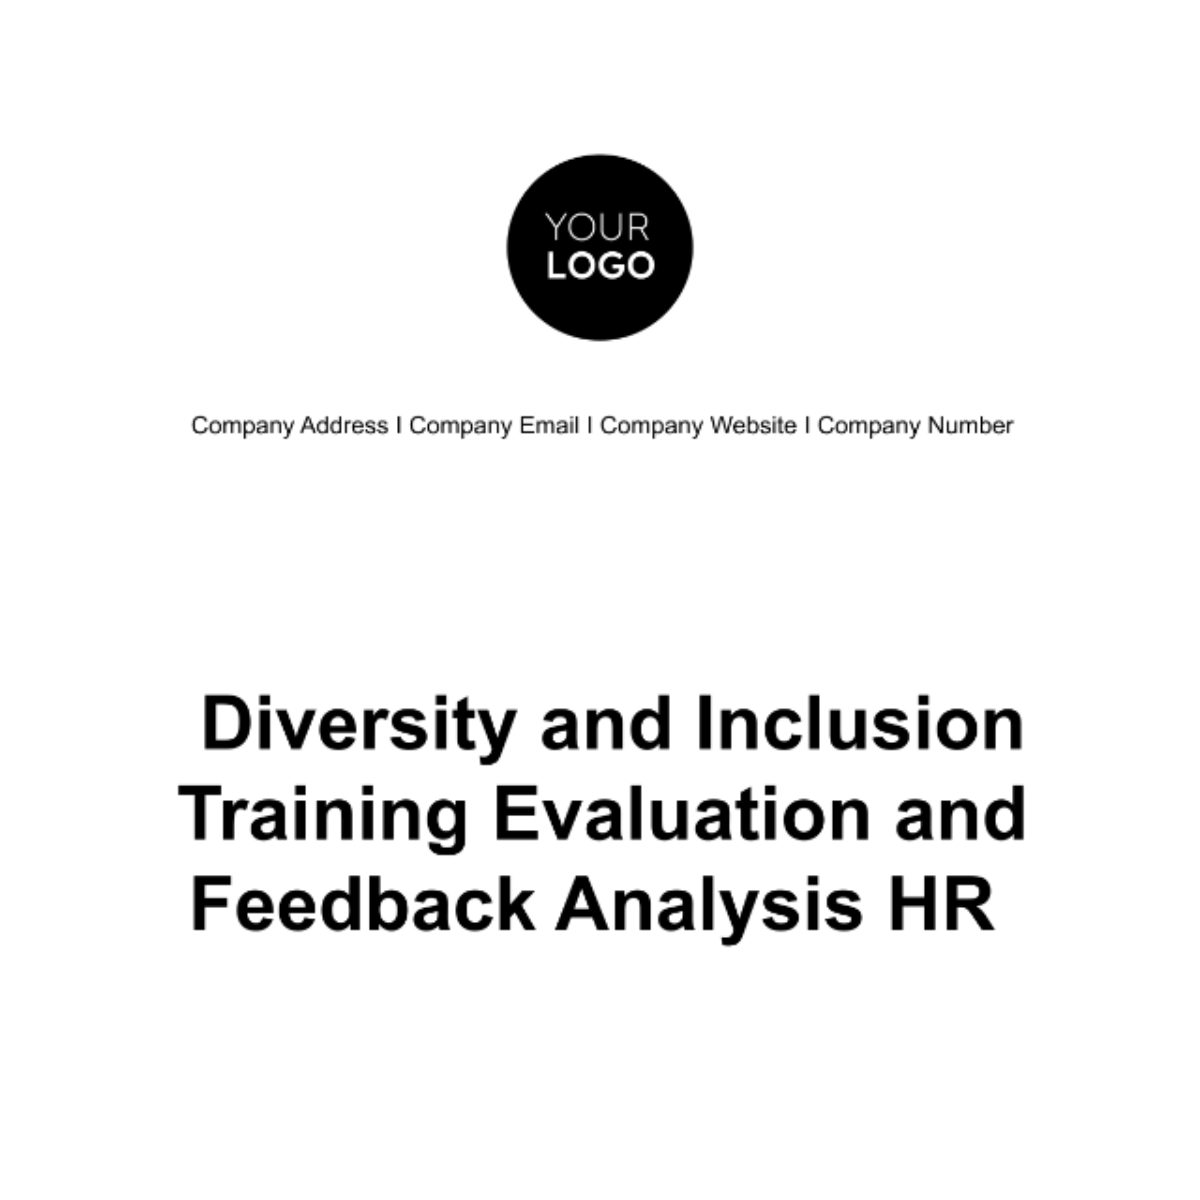 Free Diversity and Inclusion Training Evaluation and Feedback Analysis HR Template